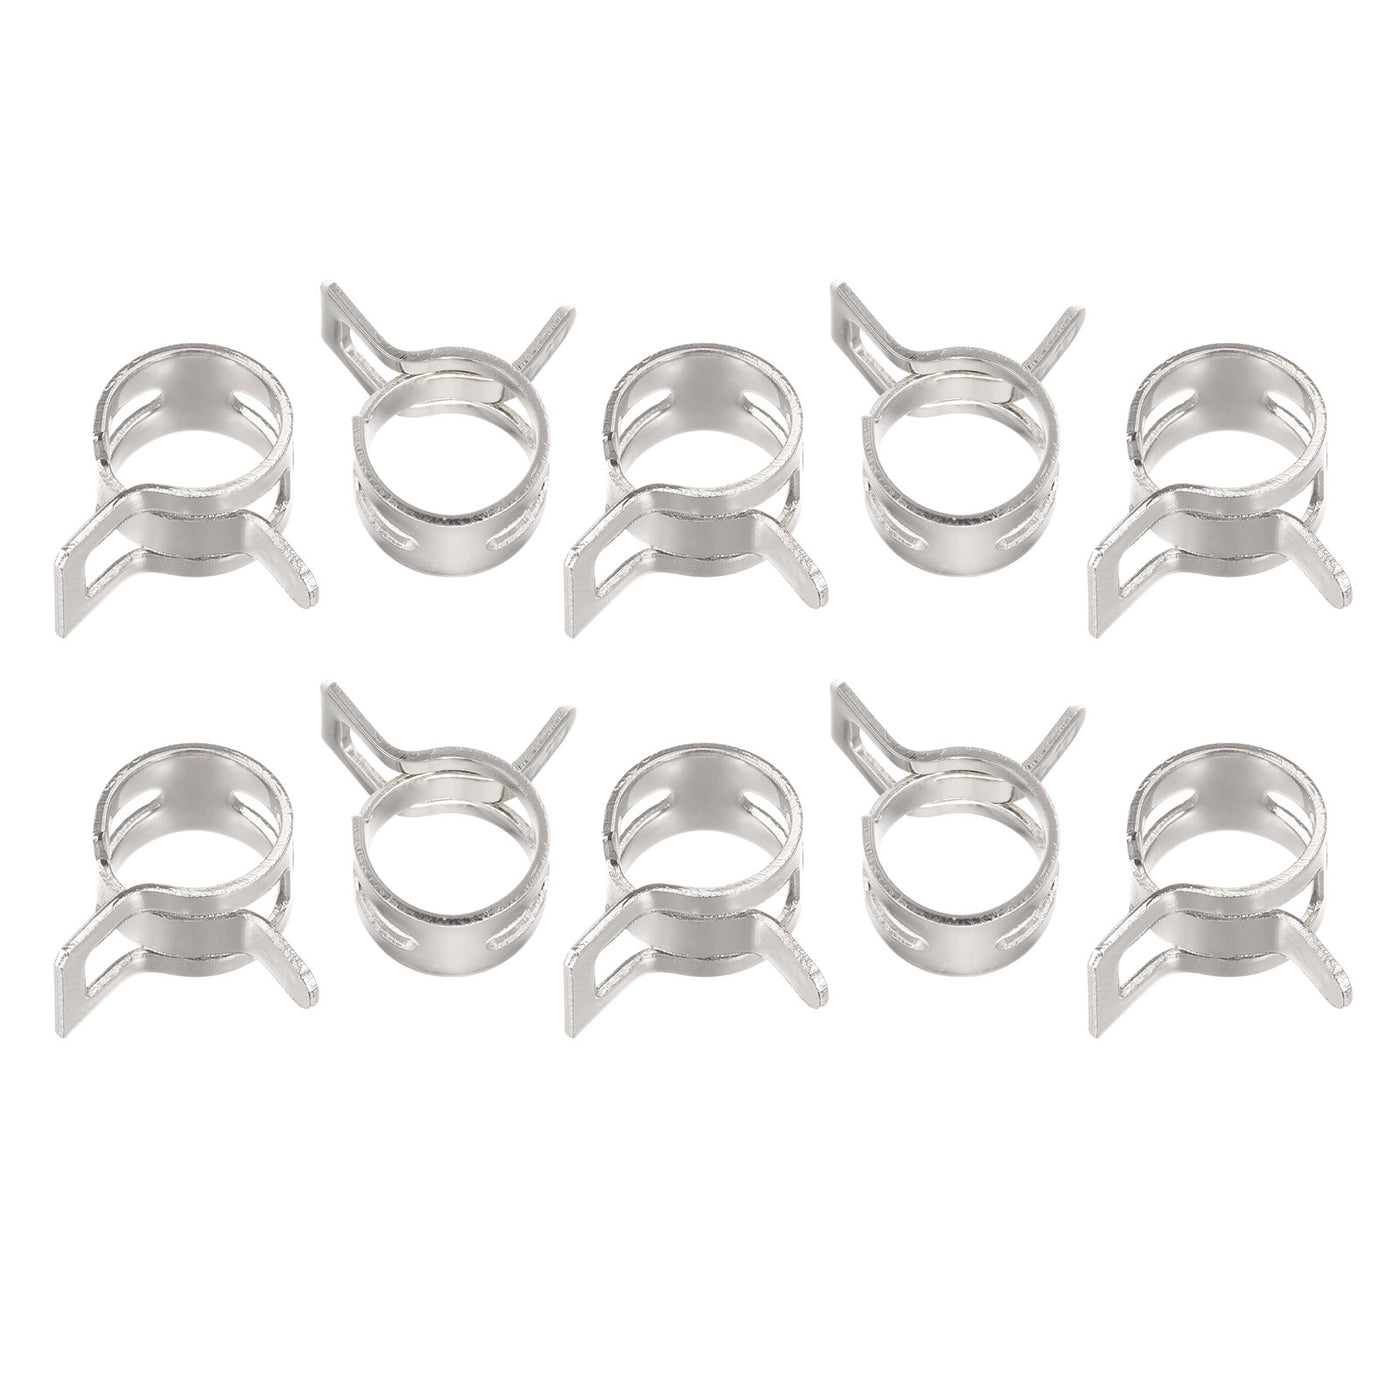 Uxcell Uxcell Spring Hose Clamp, 10pcs 65Mn Steel 13mm Low Pressure Air Clip, Nickel Plated